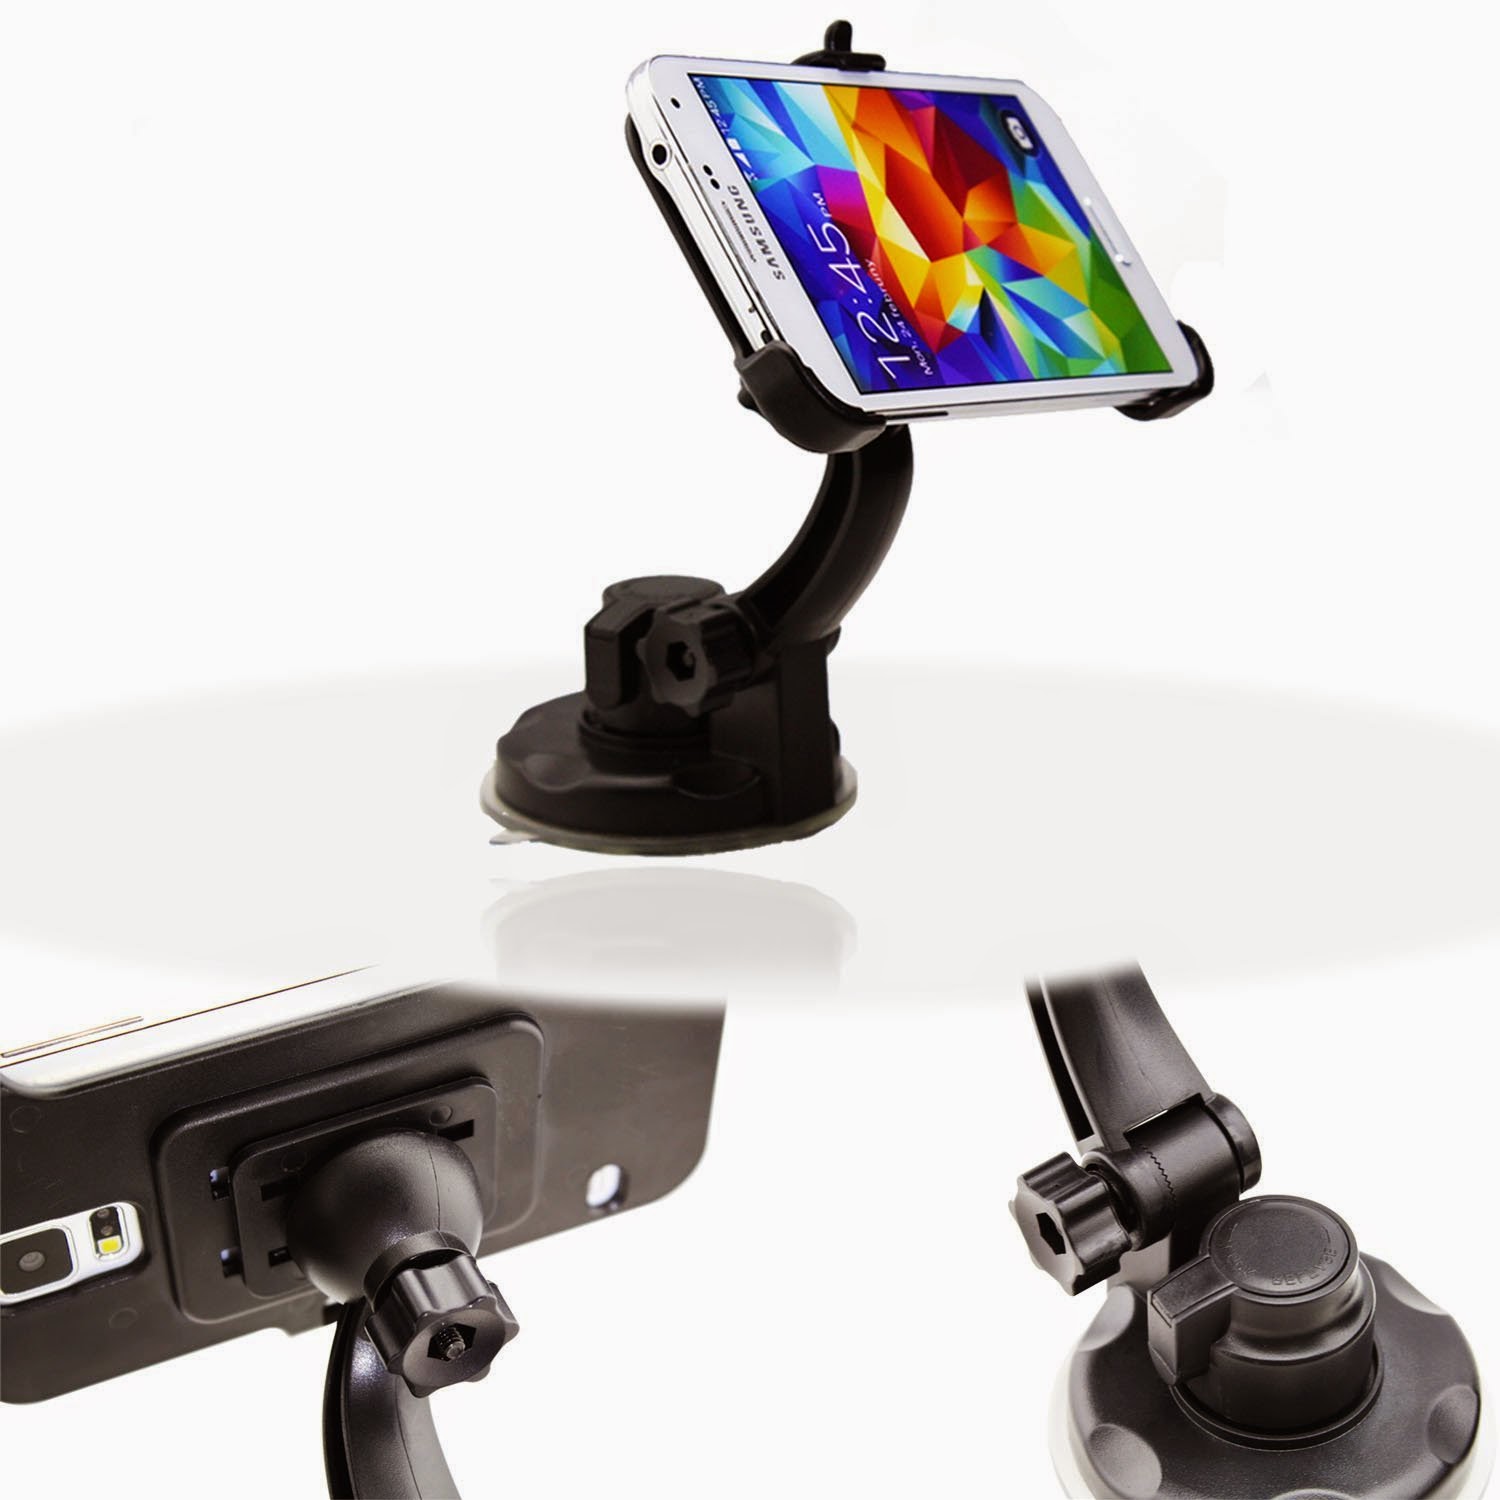 EnGive Firmly Car Mount Holder for Samsung Galaxy S5 G900 with Cleaning Cloth